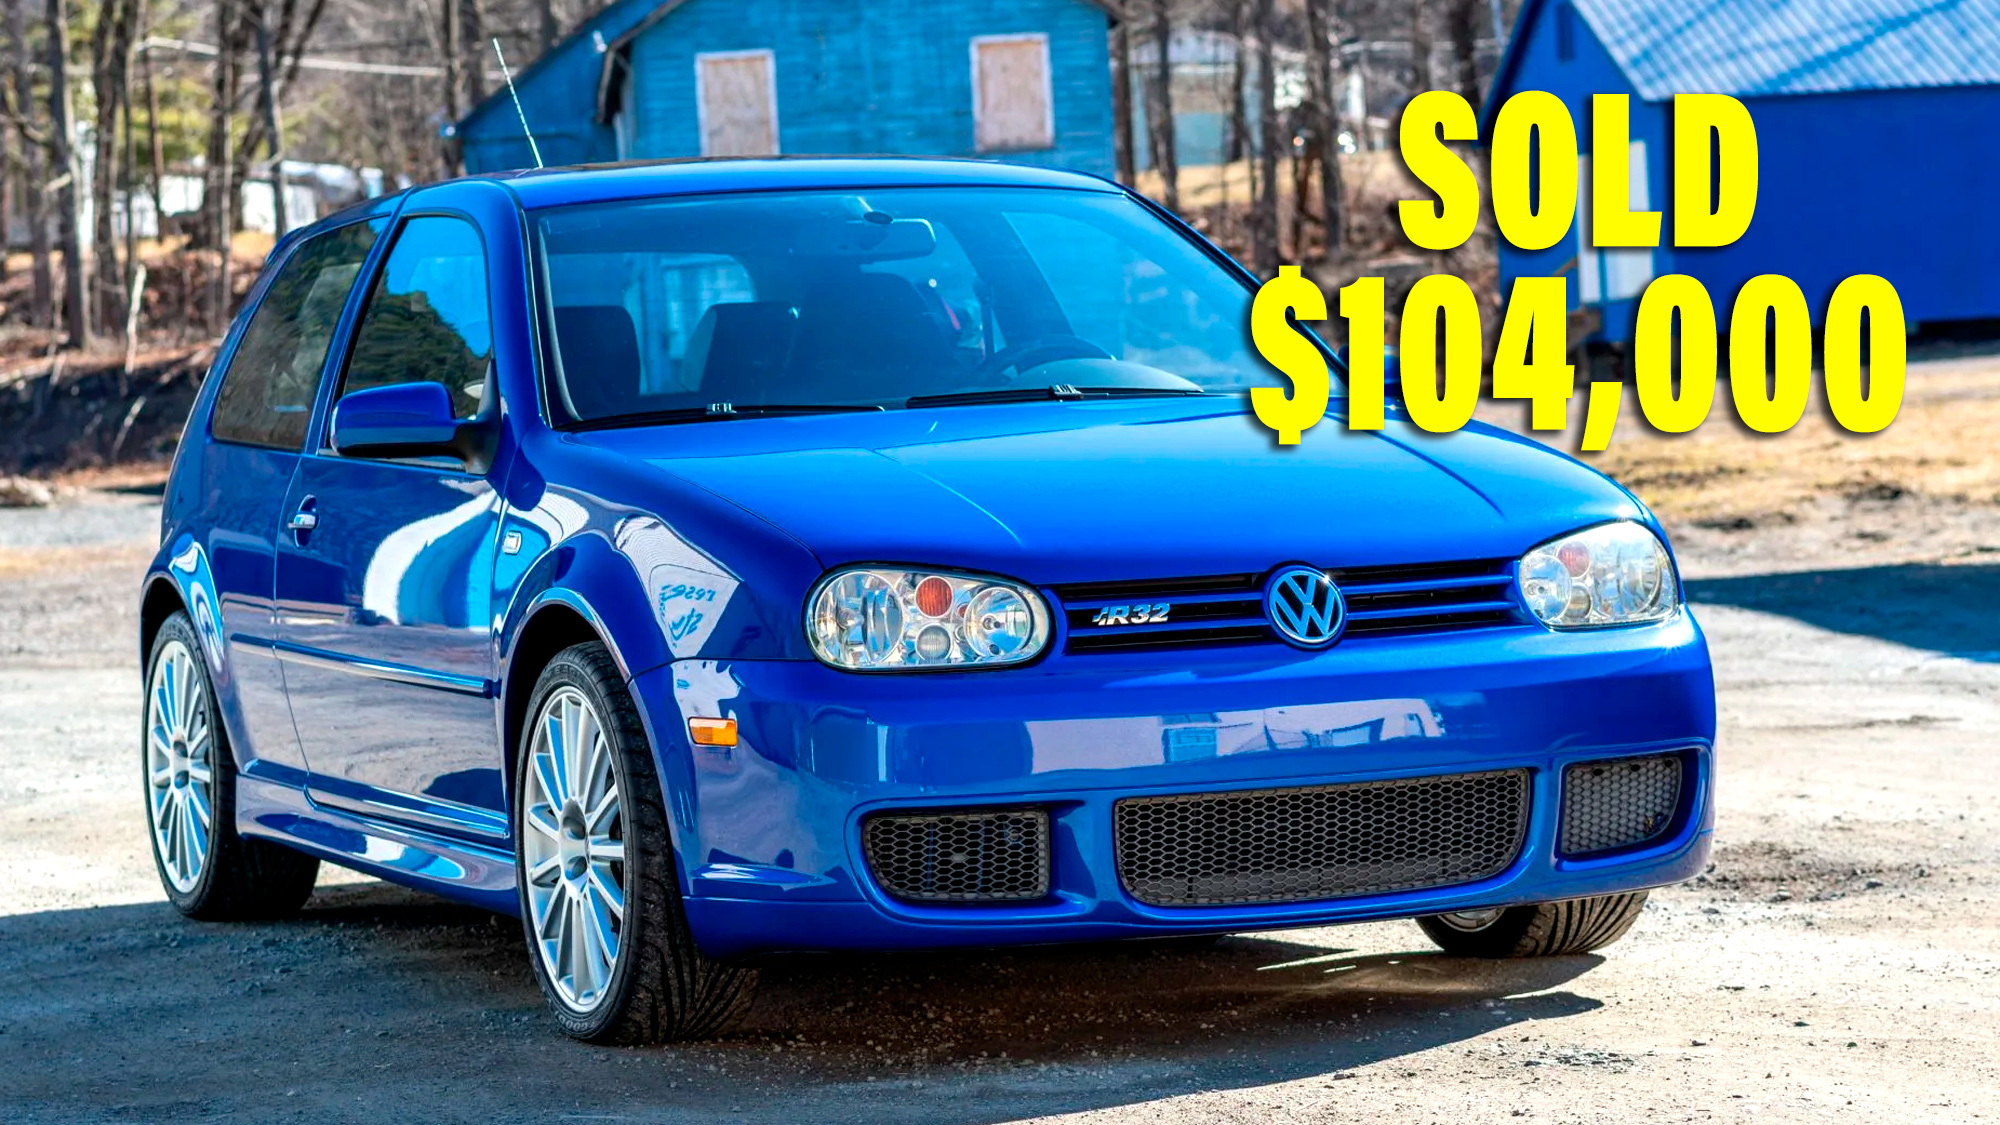 sector Tektonisch Omgekeerd Meet The $104K VW: 2004 Golf R32 With 97 Miles Finds New, Well-Heeled Owner  | Carscoops